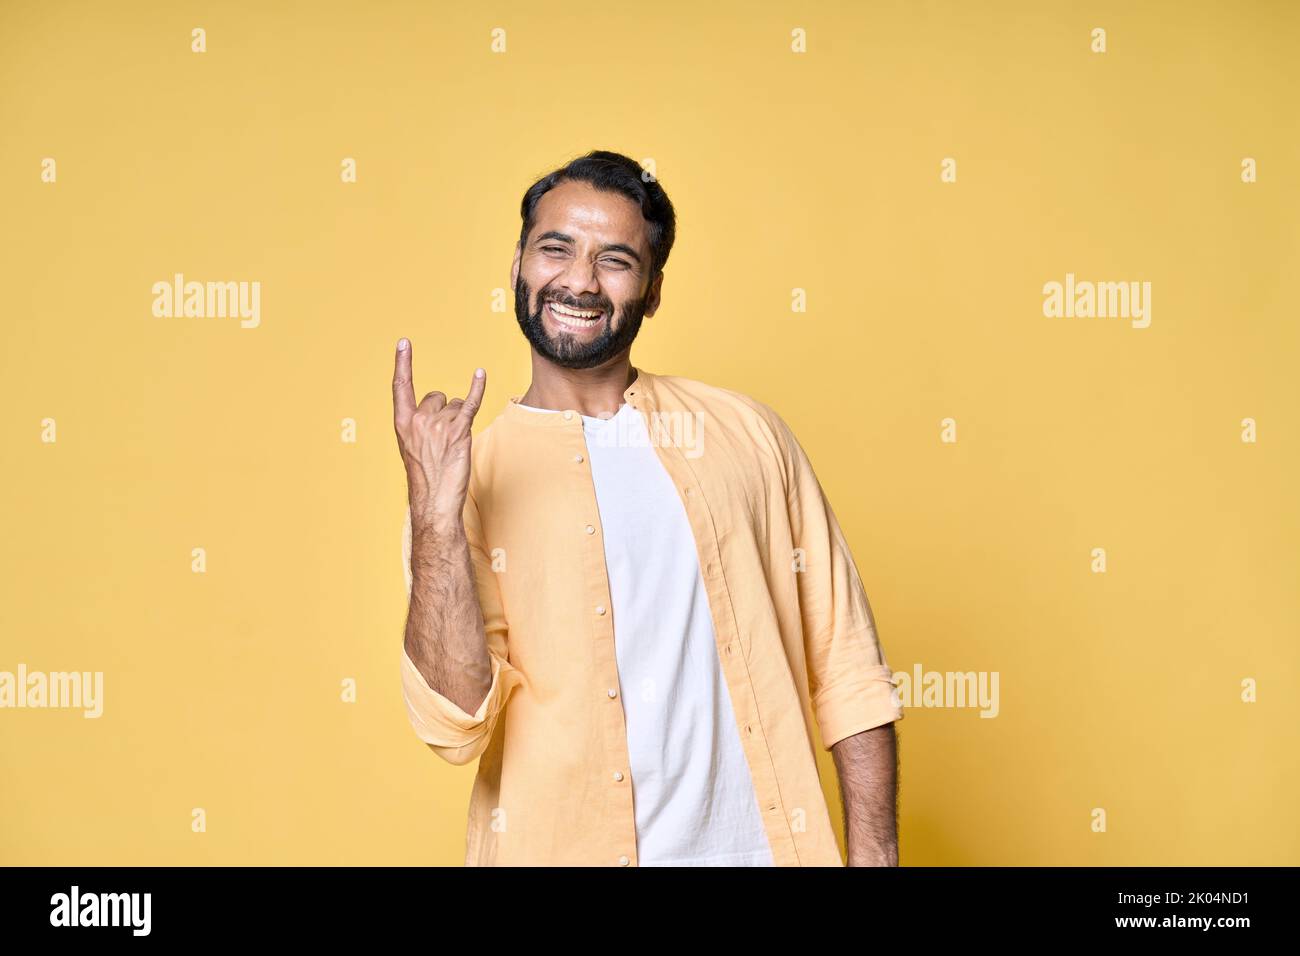 Happy indian man showing rock n roll horns hand gesture isolated on yellow. Stock Photo